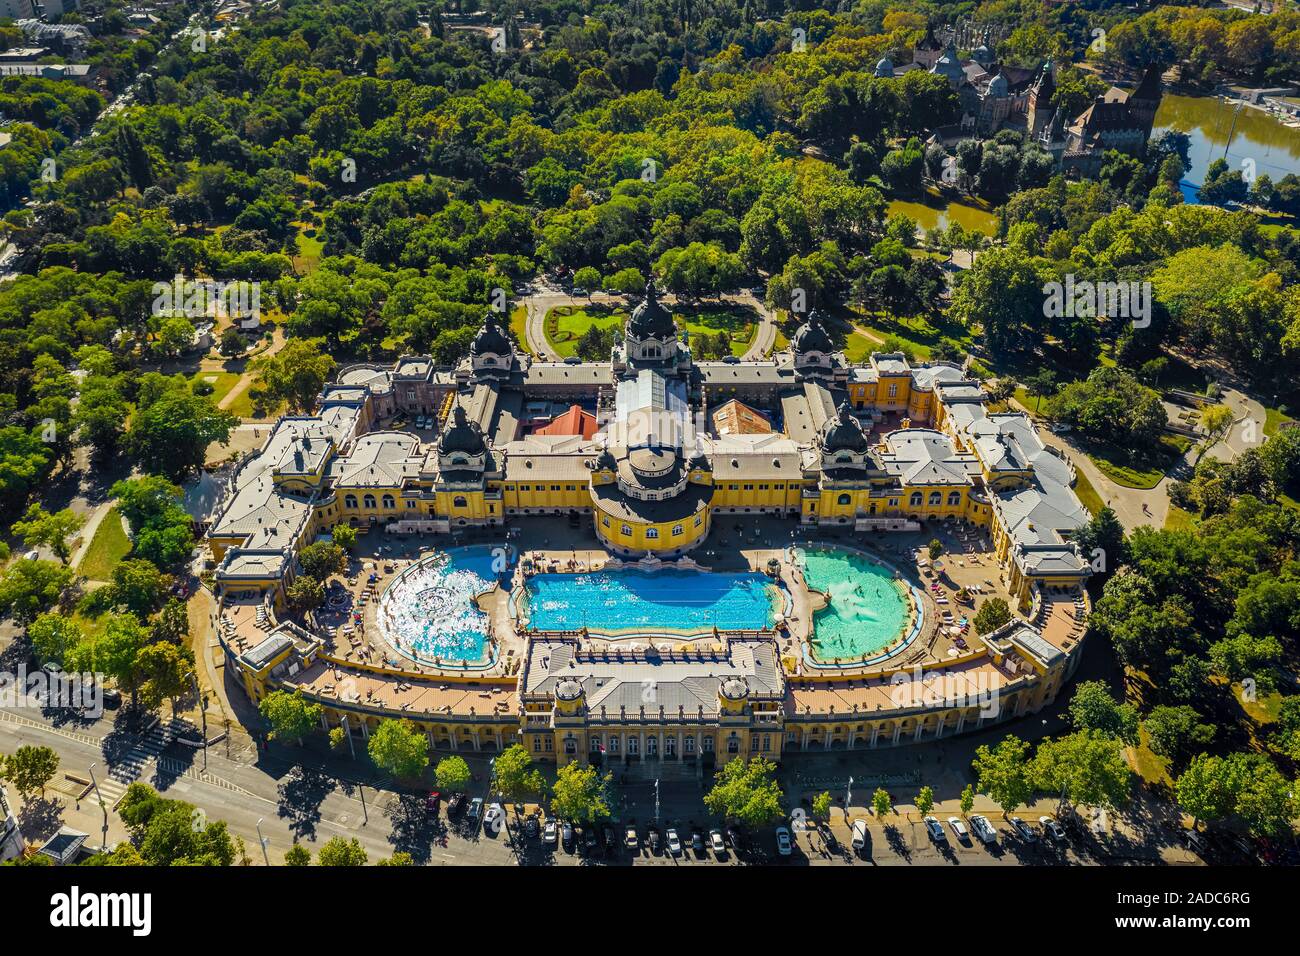 Budapest, Hungary - Aerial drone view of the famous Szechenyi Thermal Bath and Spa in City Park (Varosliget) taken from high above on a sunny summer d Stock Photo